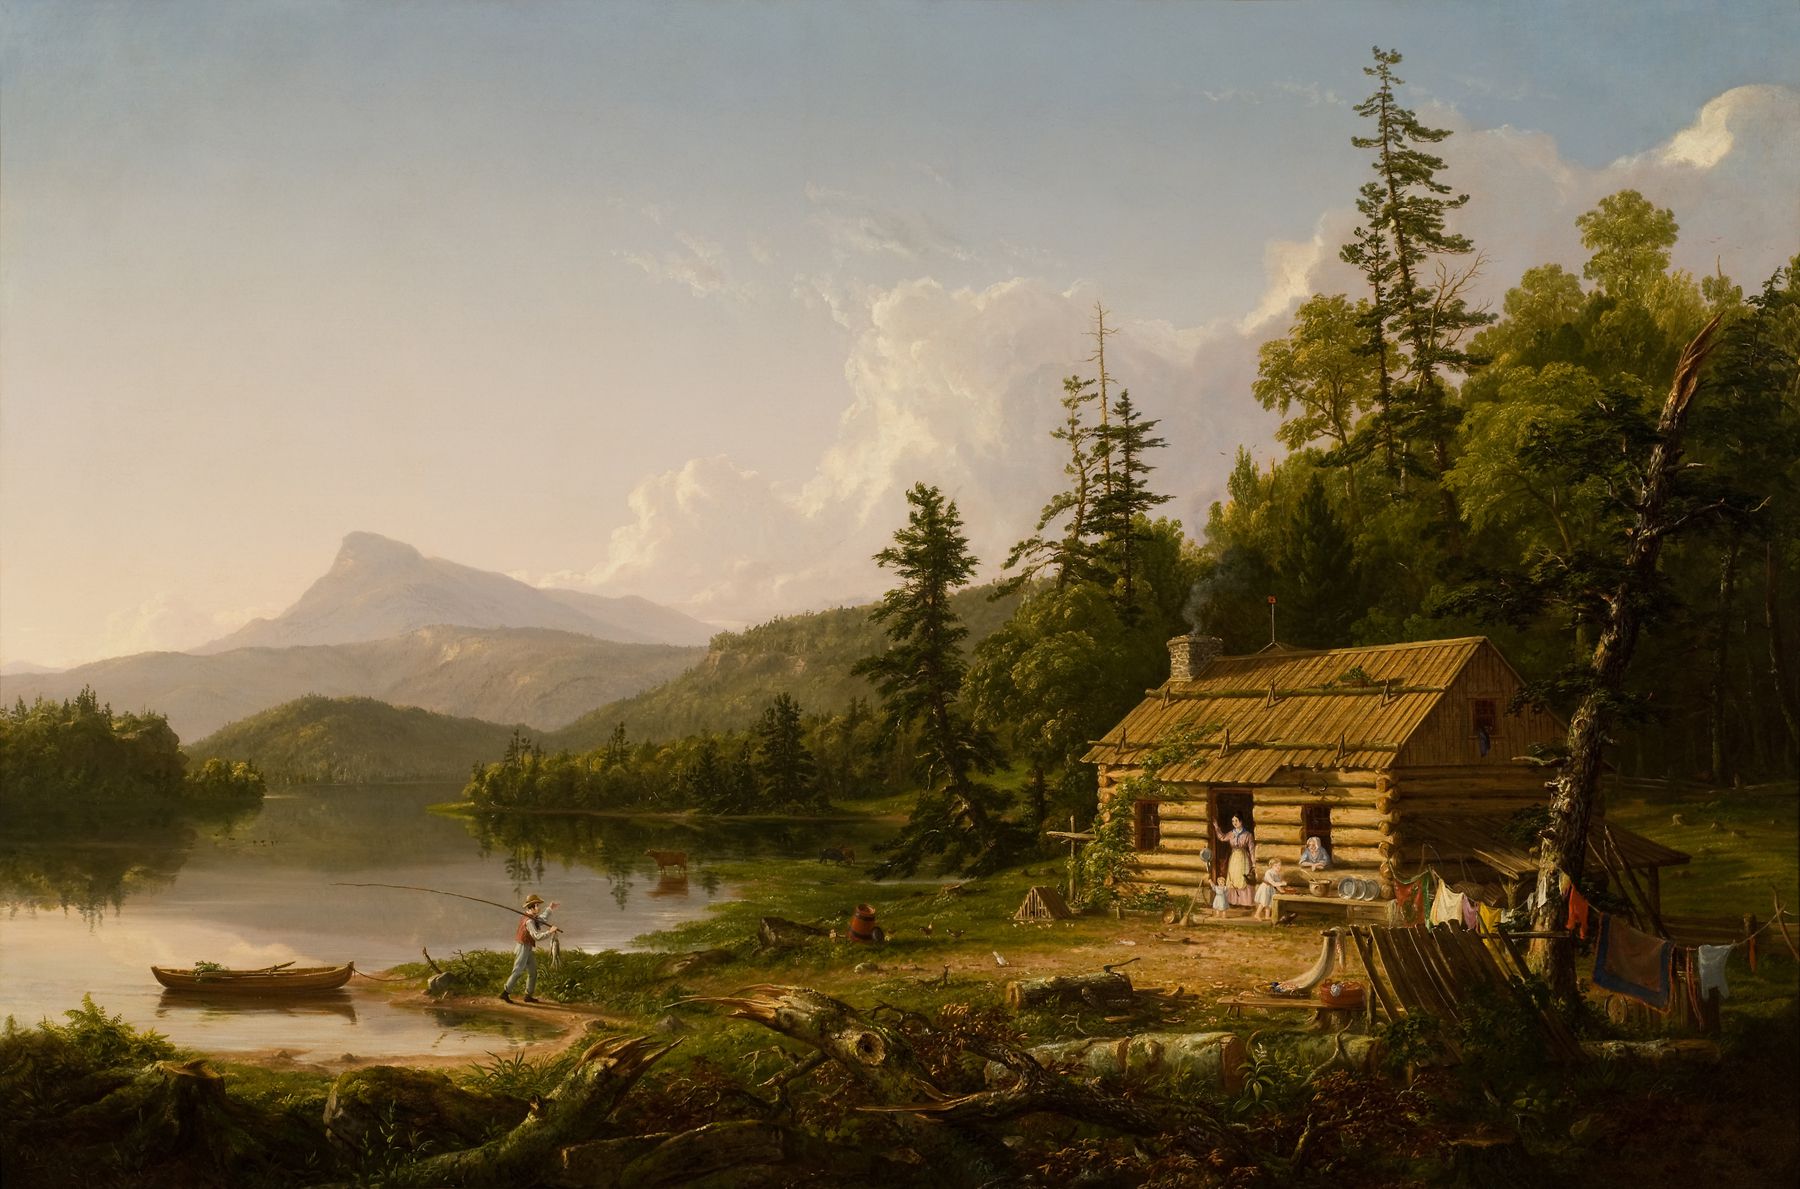 Home in the Woods by Thomas Cole (1847)